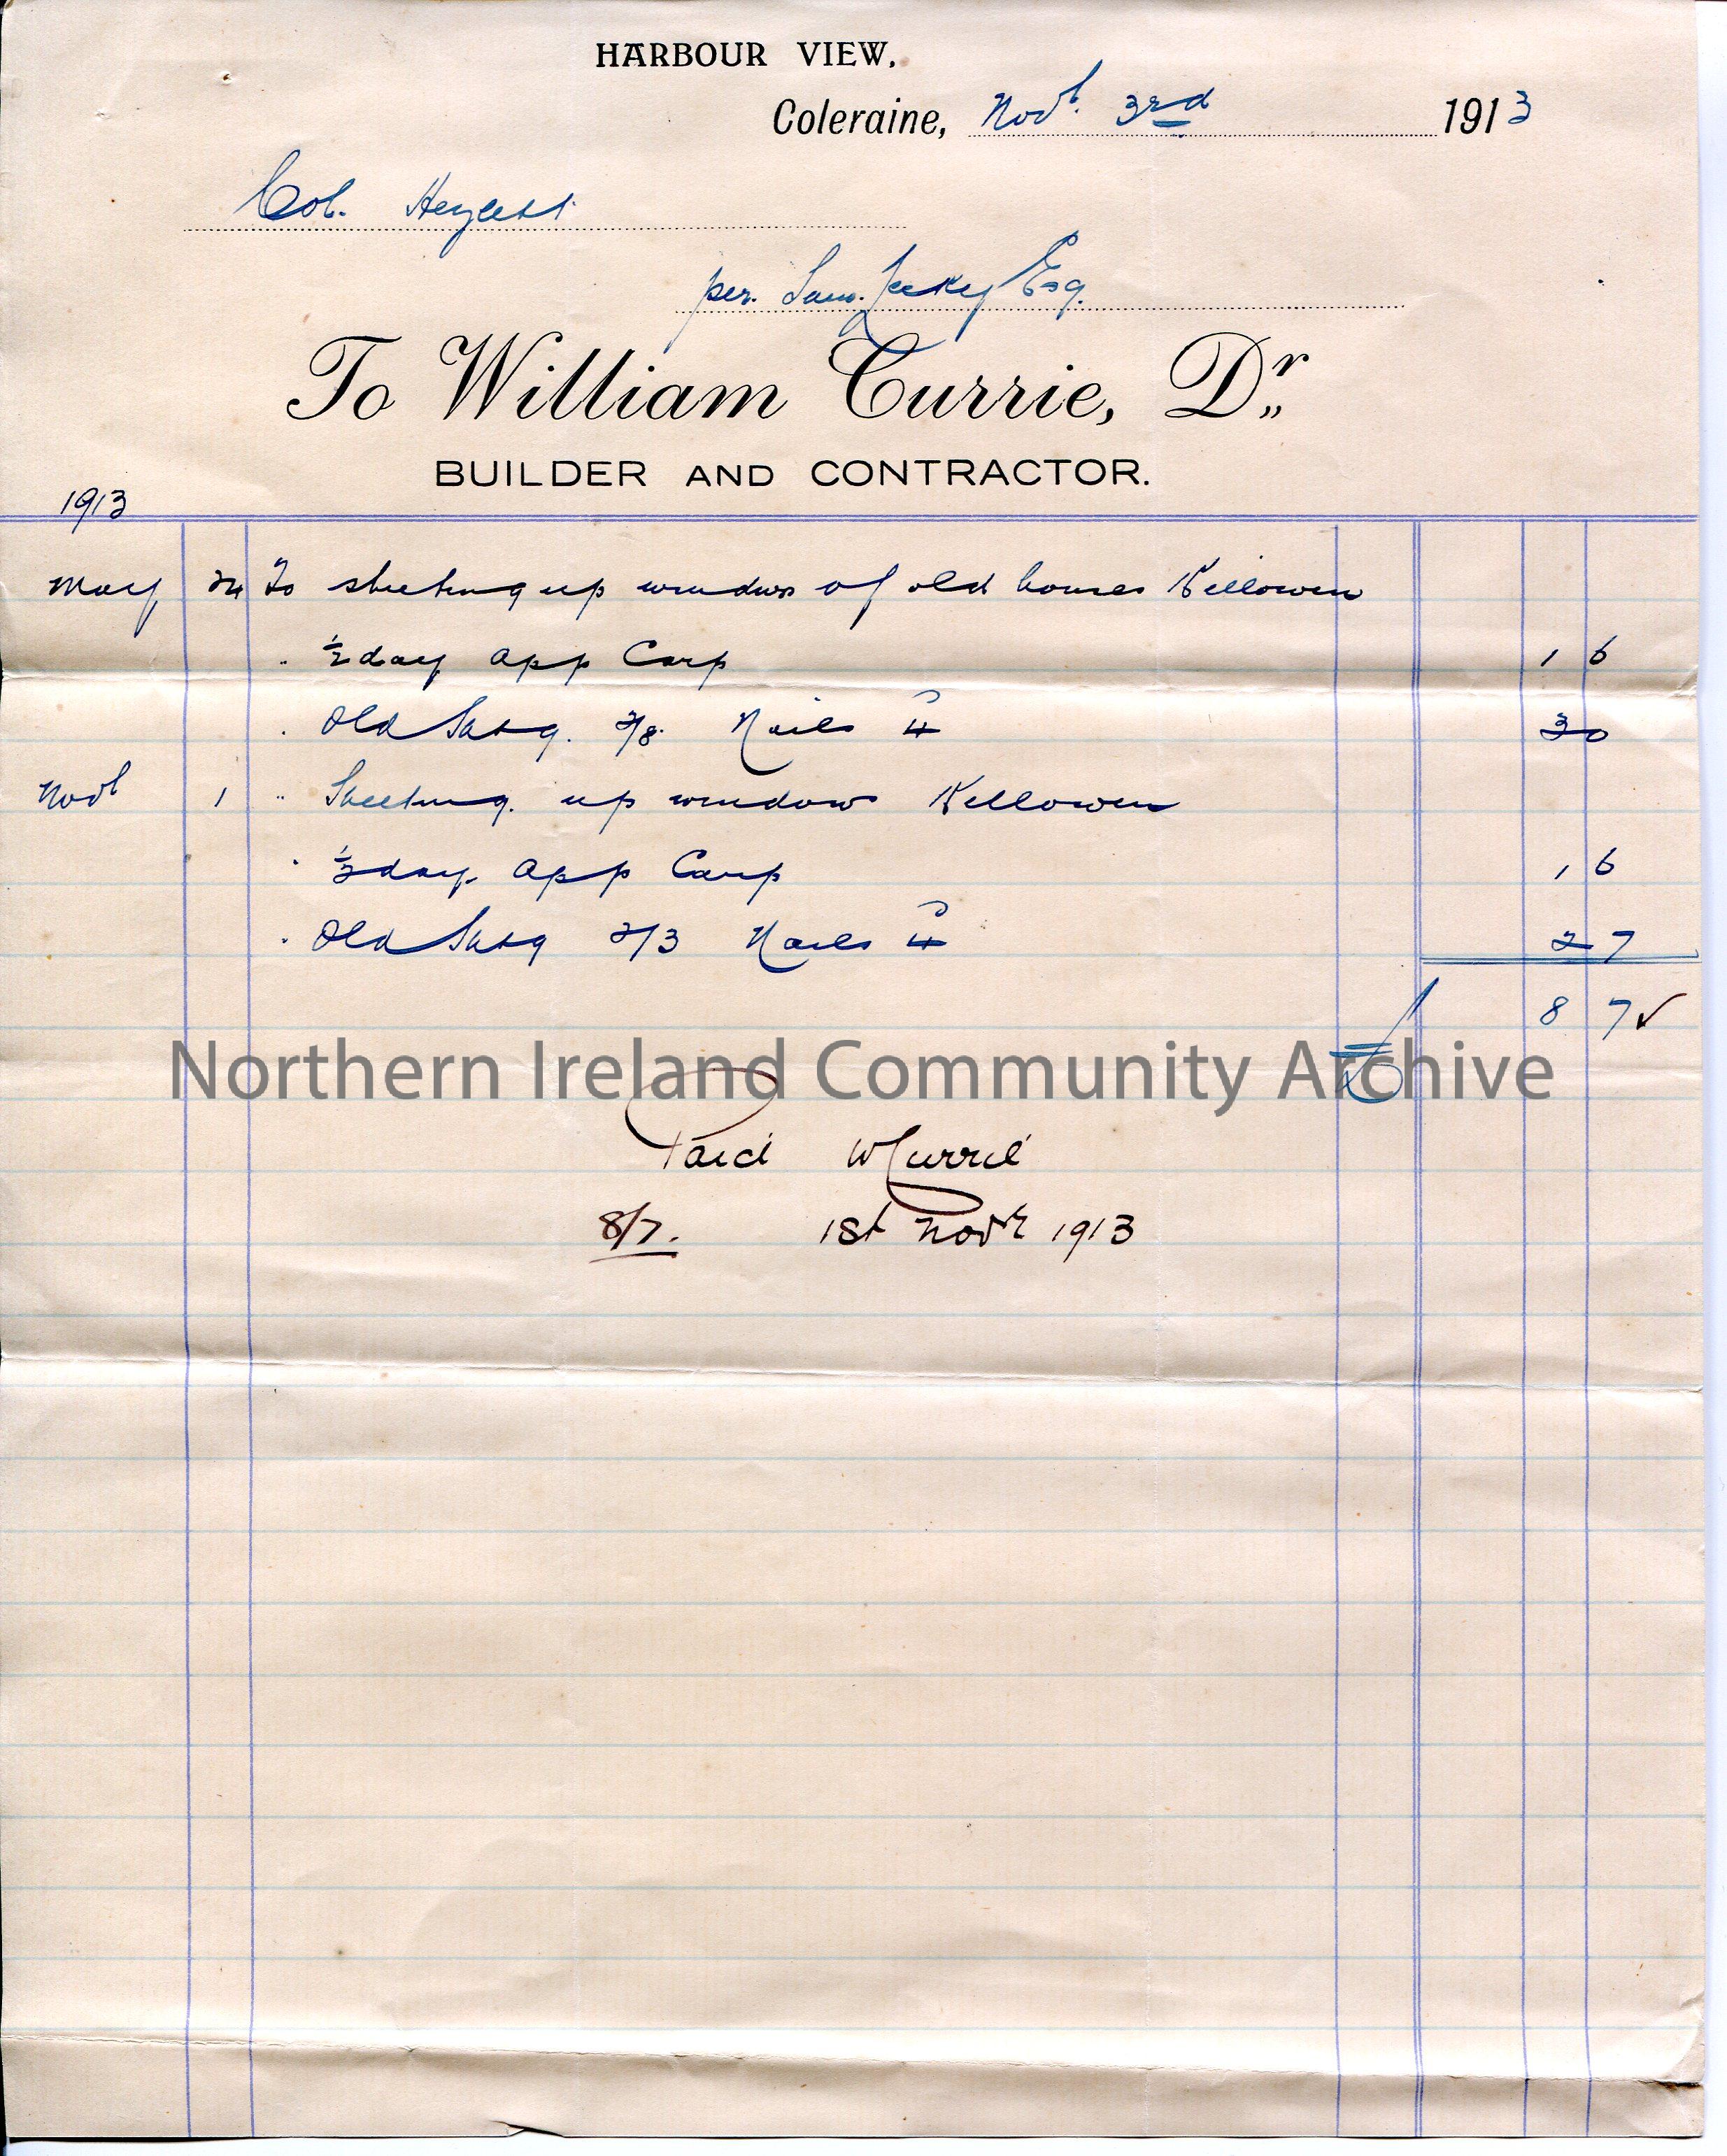 Handwritten receipt for payment received from Col. Hezlett [Hezlet] per Sam Lecky, esq to William Currie, builder and contractor. Receipt dated 3rd No…